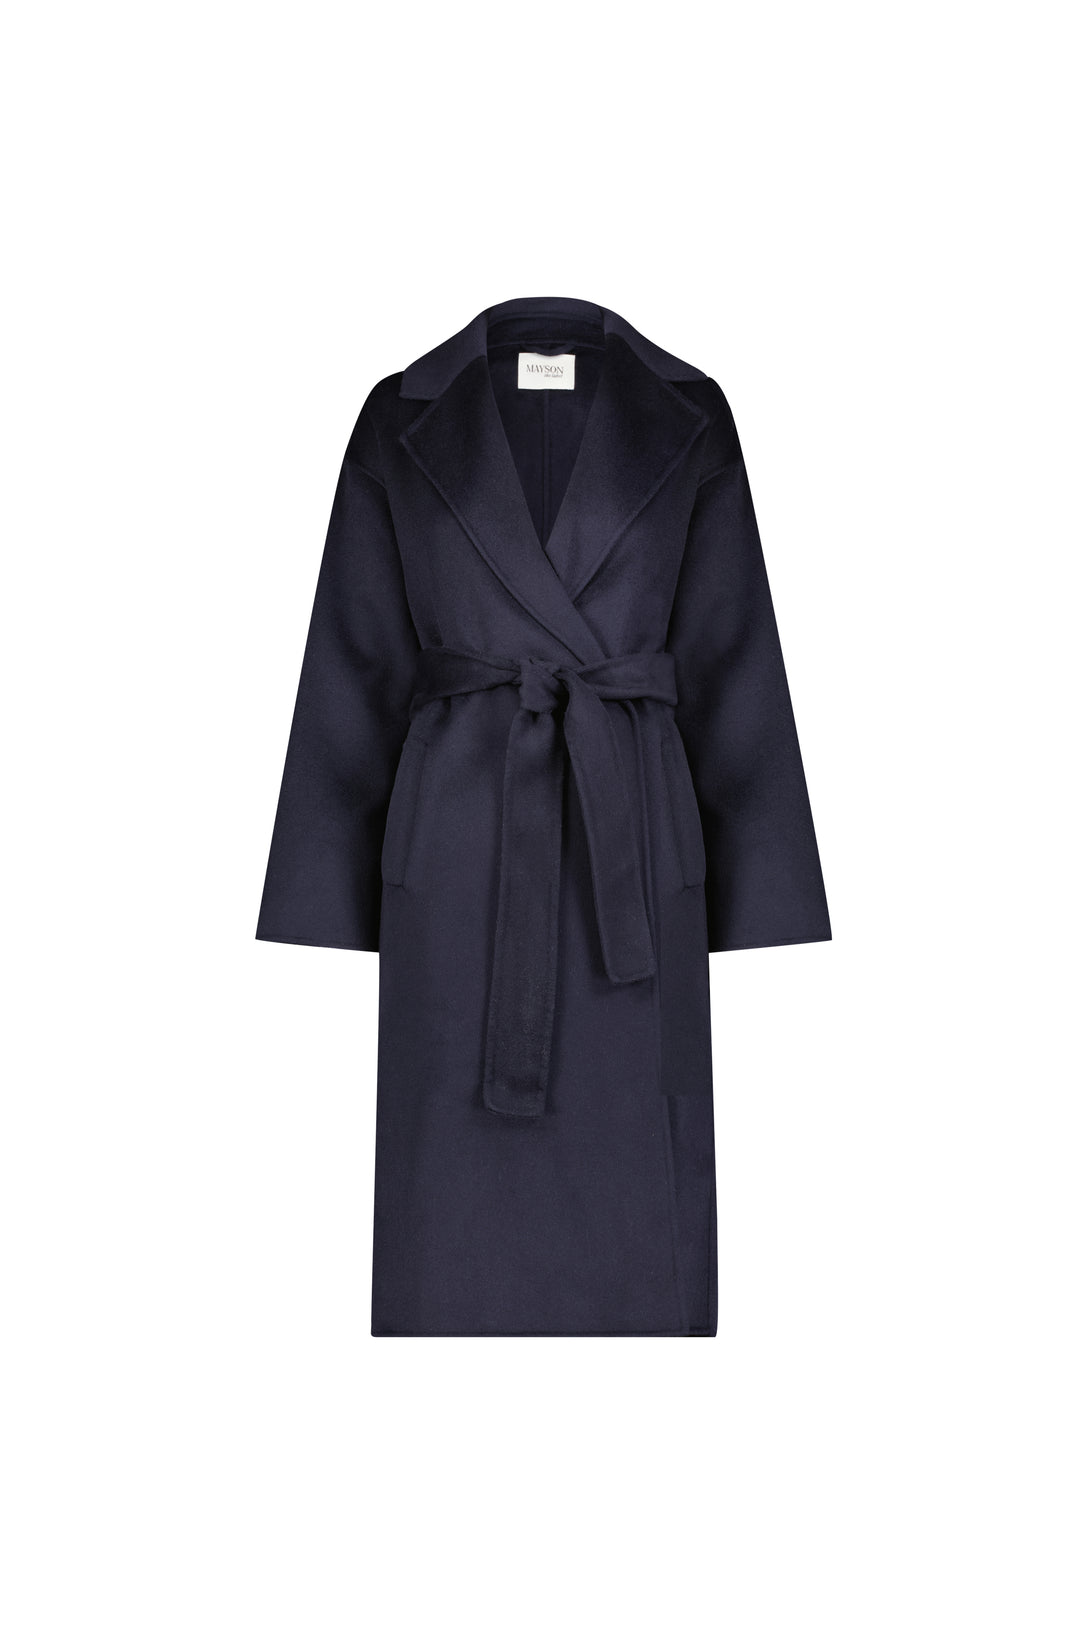 wool cashmere double-faced wrap coat in navy featured